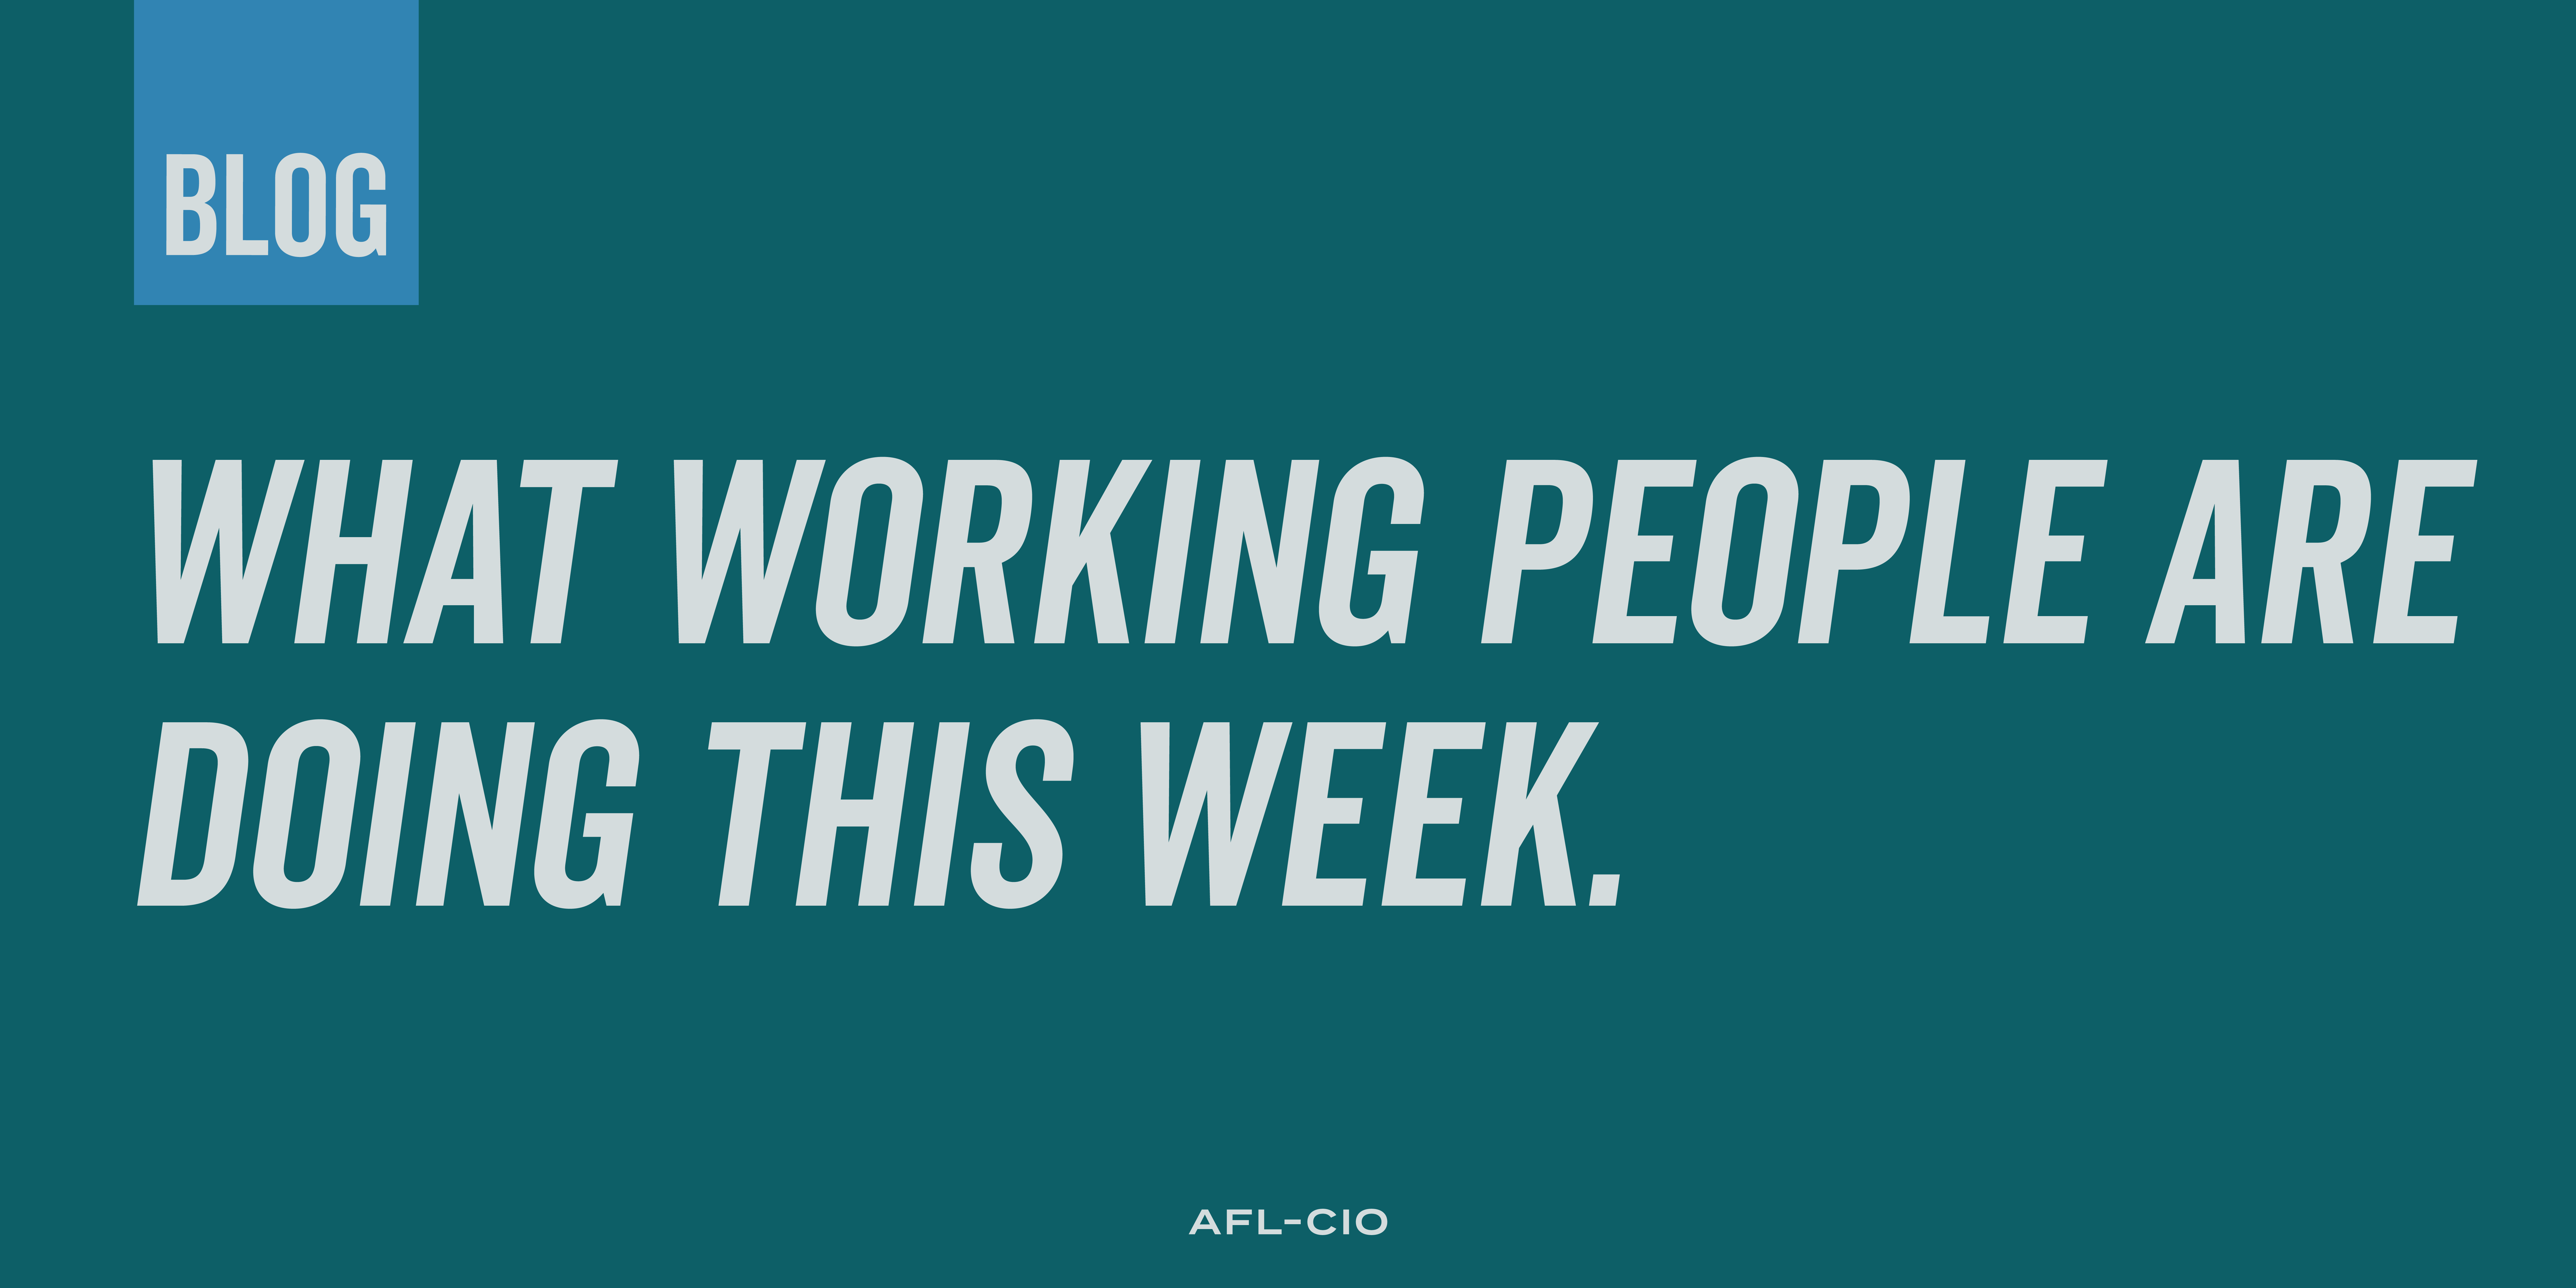 Know Your Rights: What Working People Are Doing This Week